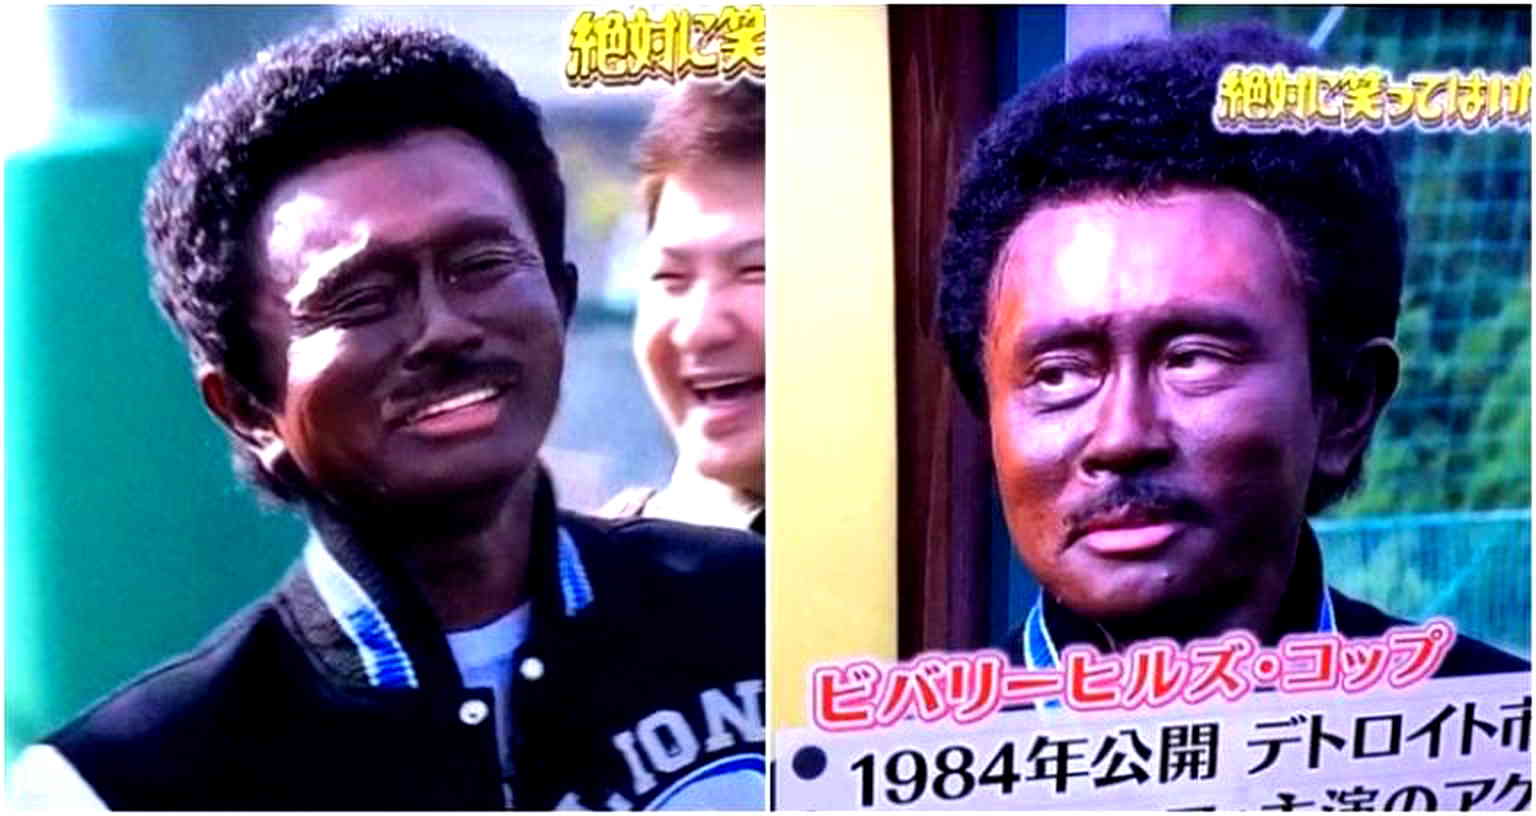 Japan Starts 2018 With a Comedian in Blackface Playing ‘Eddie Murphy’